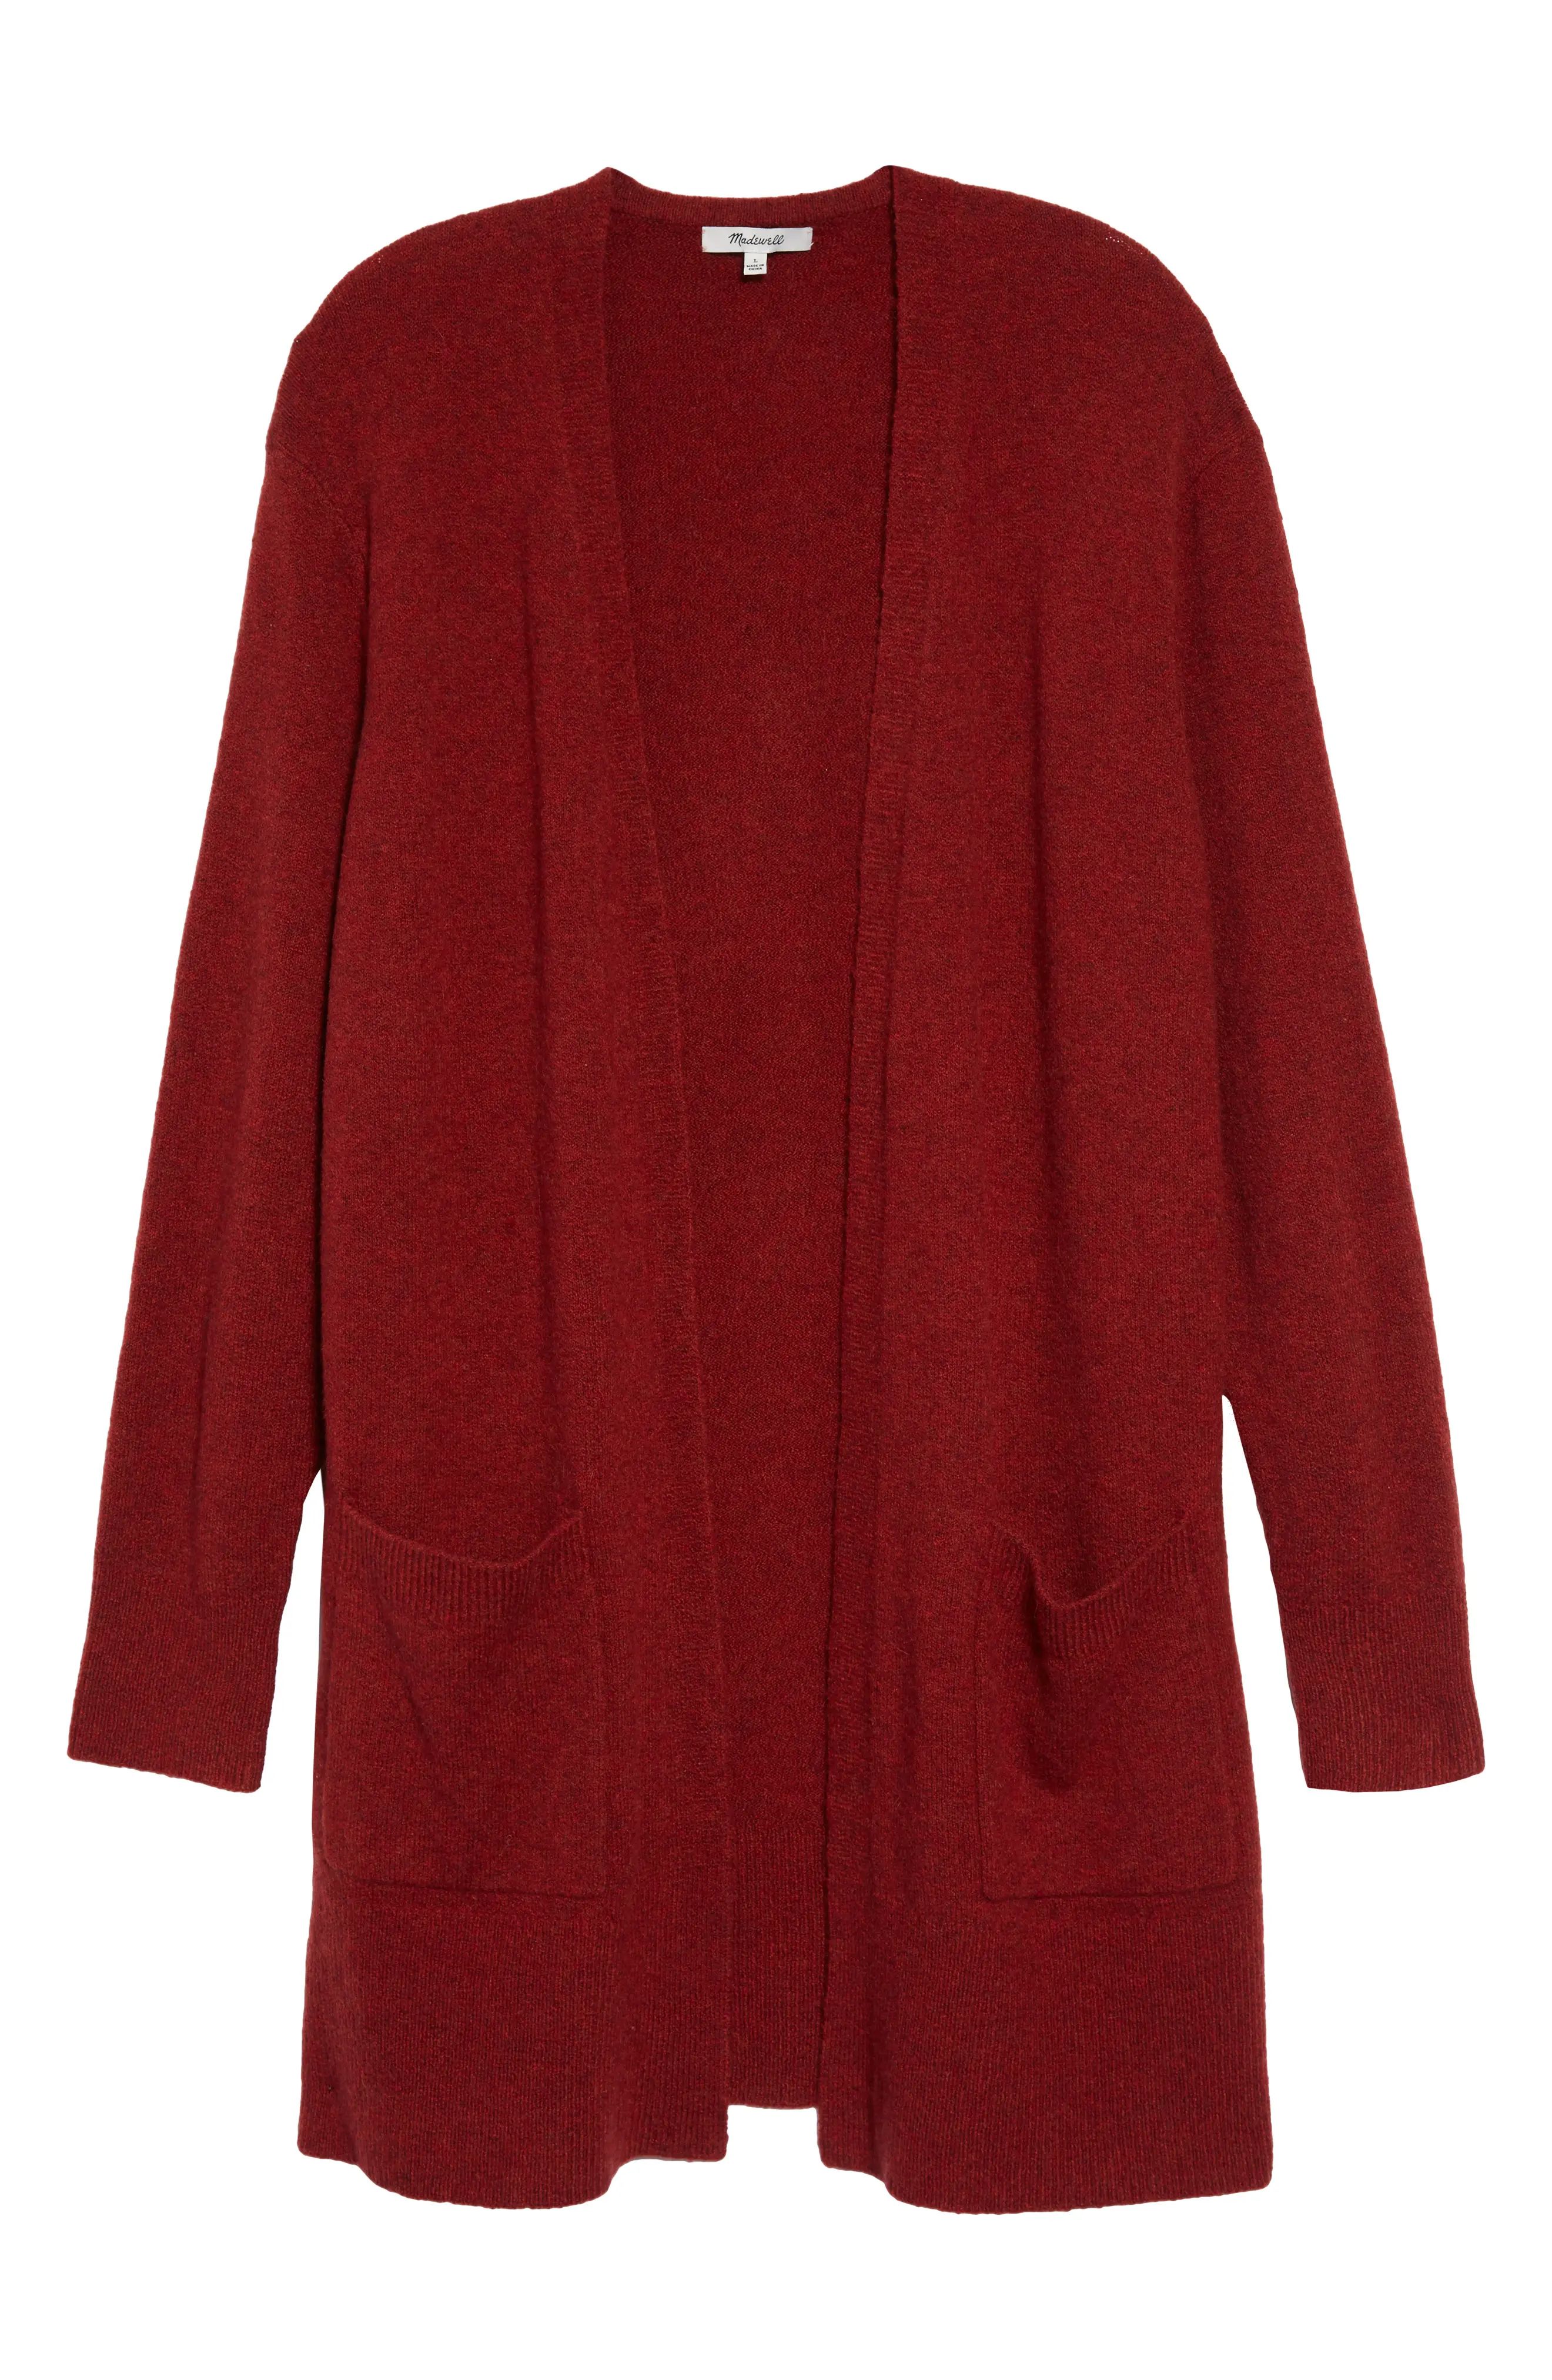 Women's Madewell Kent Cardigan Sweater, Size Small - Burgundy | Nordstrom